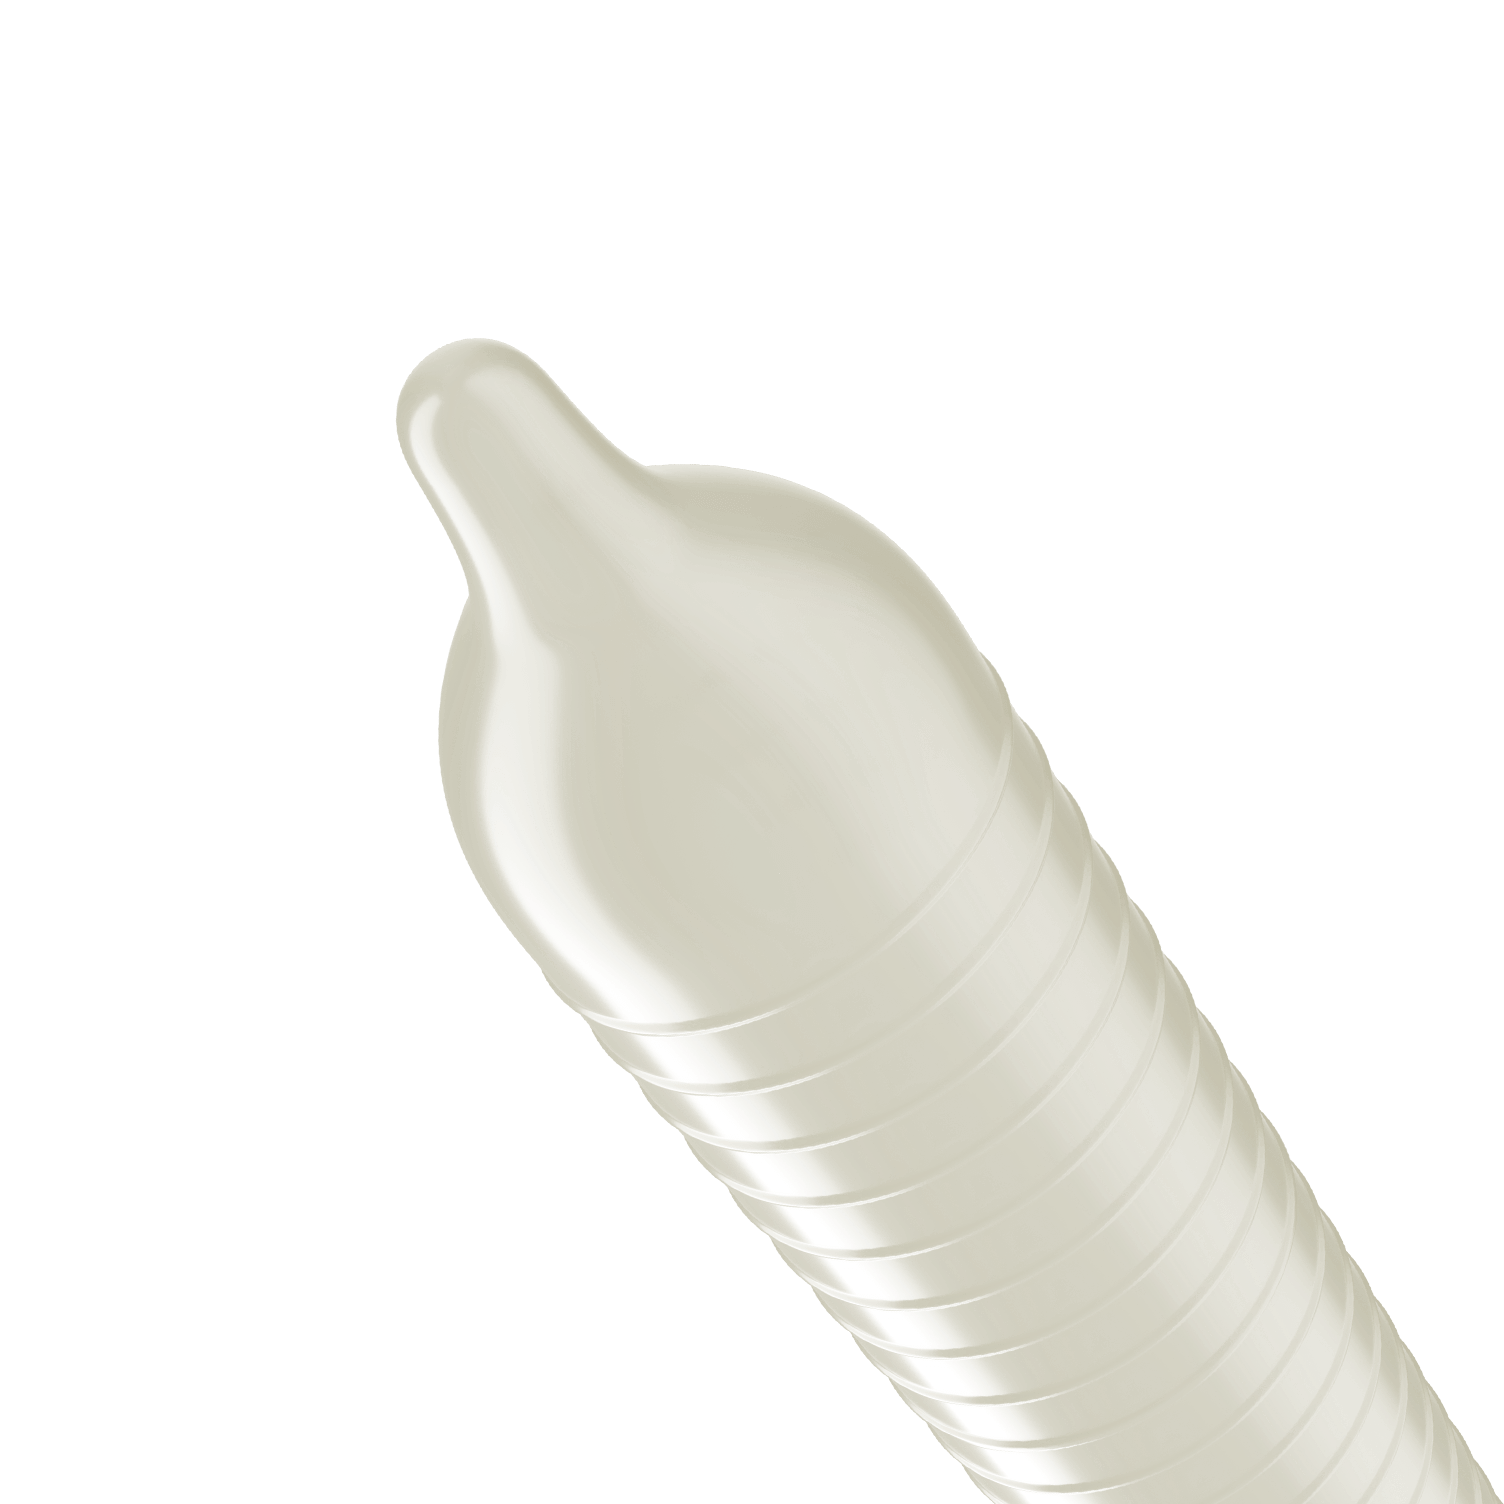 Trojan Ultra Ribbed deep ribbed condom with reservoir tip.